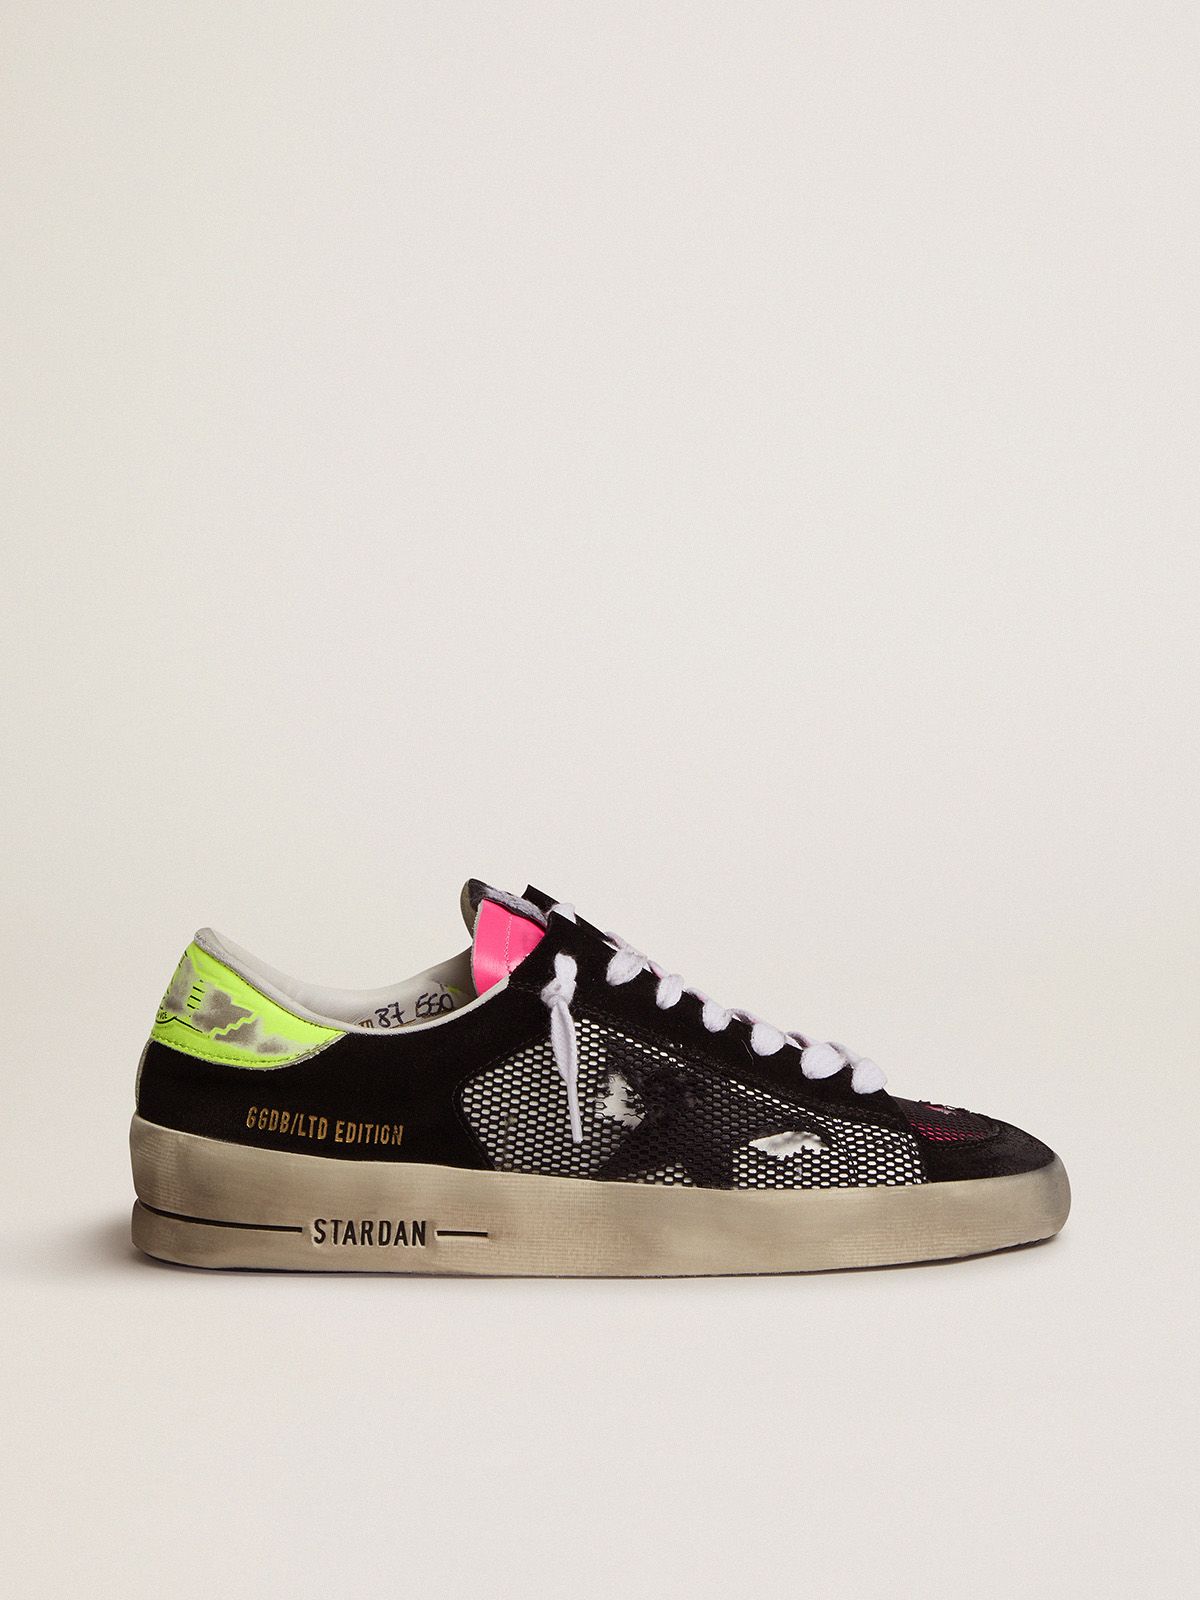 golden goose sneakers fuchsia yellow Stardan Women’s in Limited Edition and